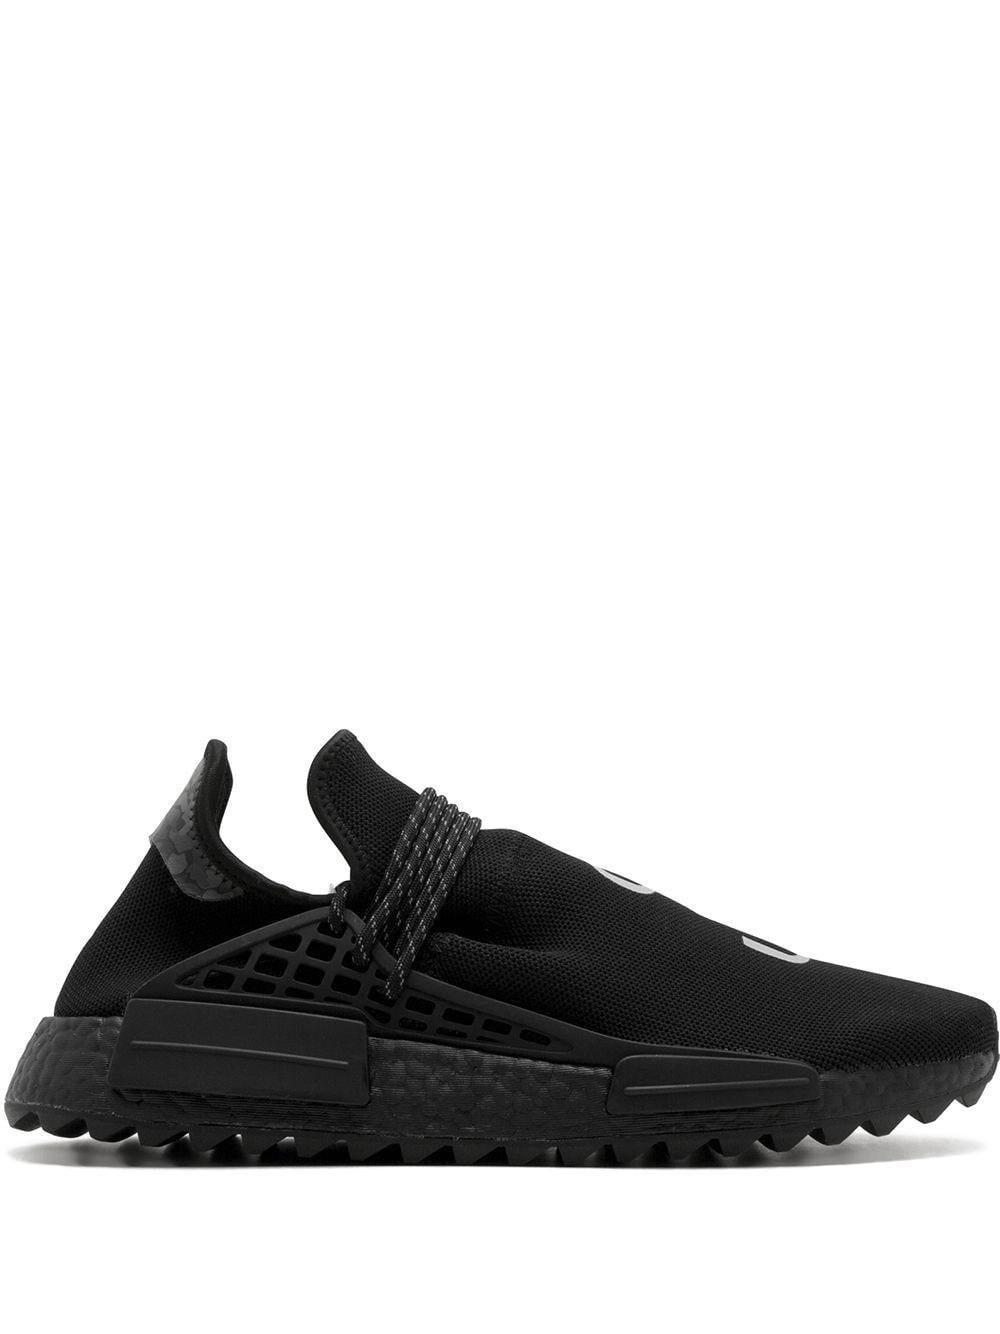 adidas Rubber Pharrell Human Race Nmd Sneakers in Black for Men - Lyst